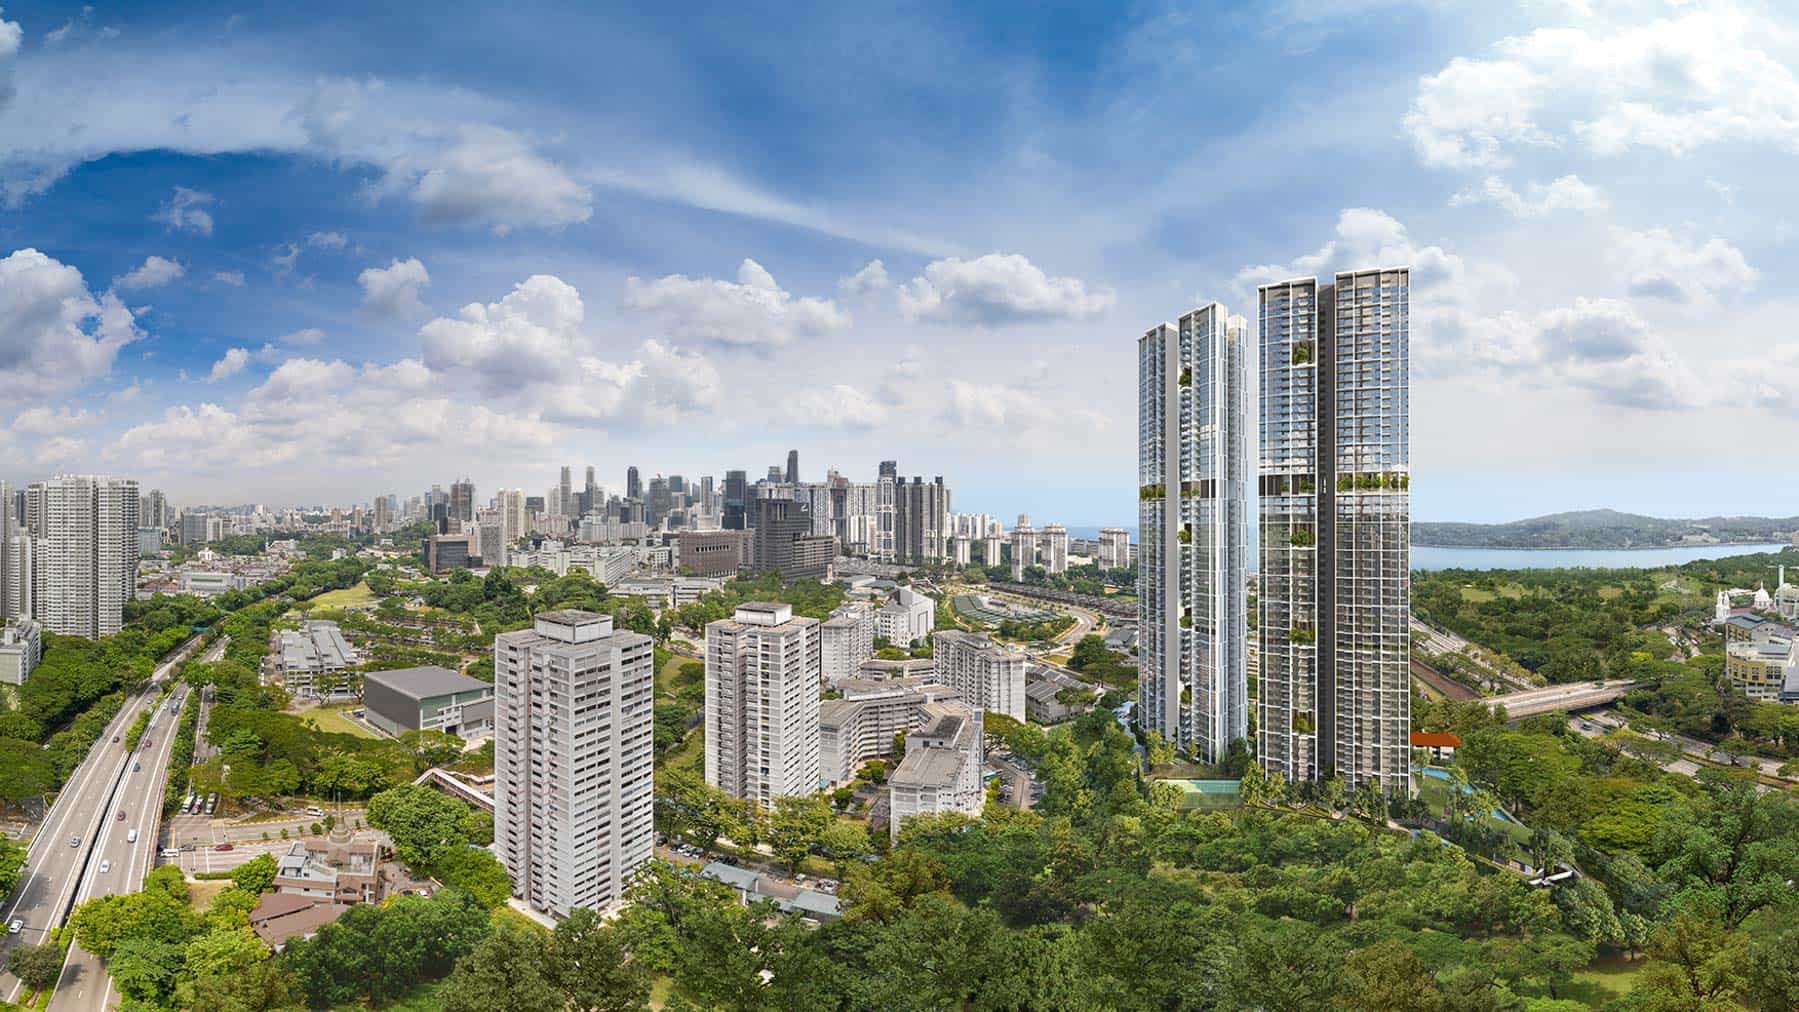 Singapore New Launch Condo Showflat - The Official Info Site